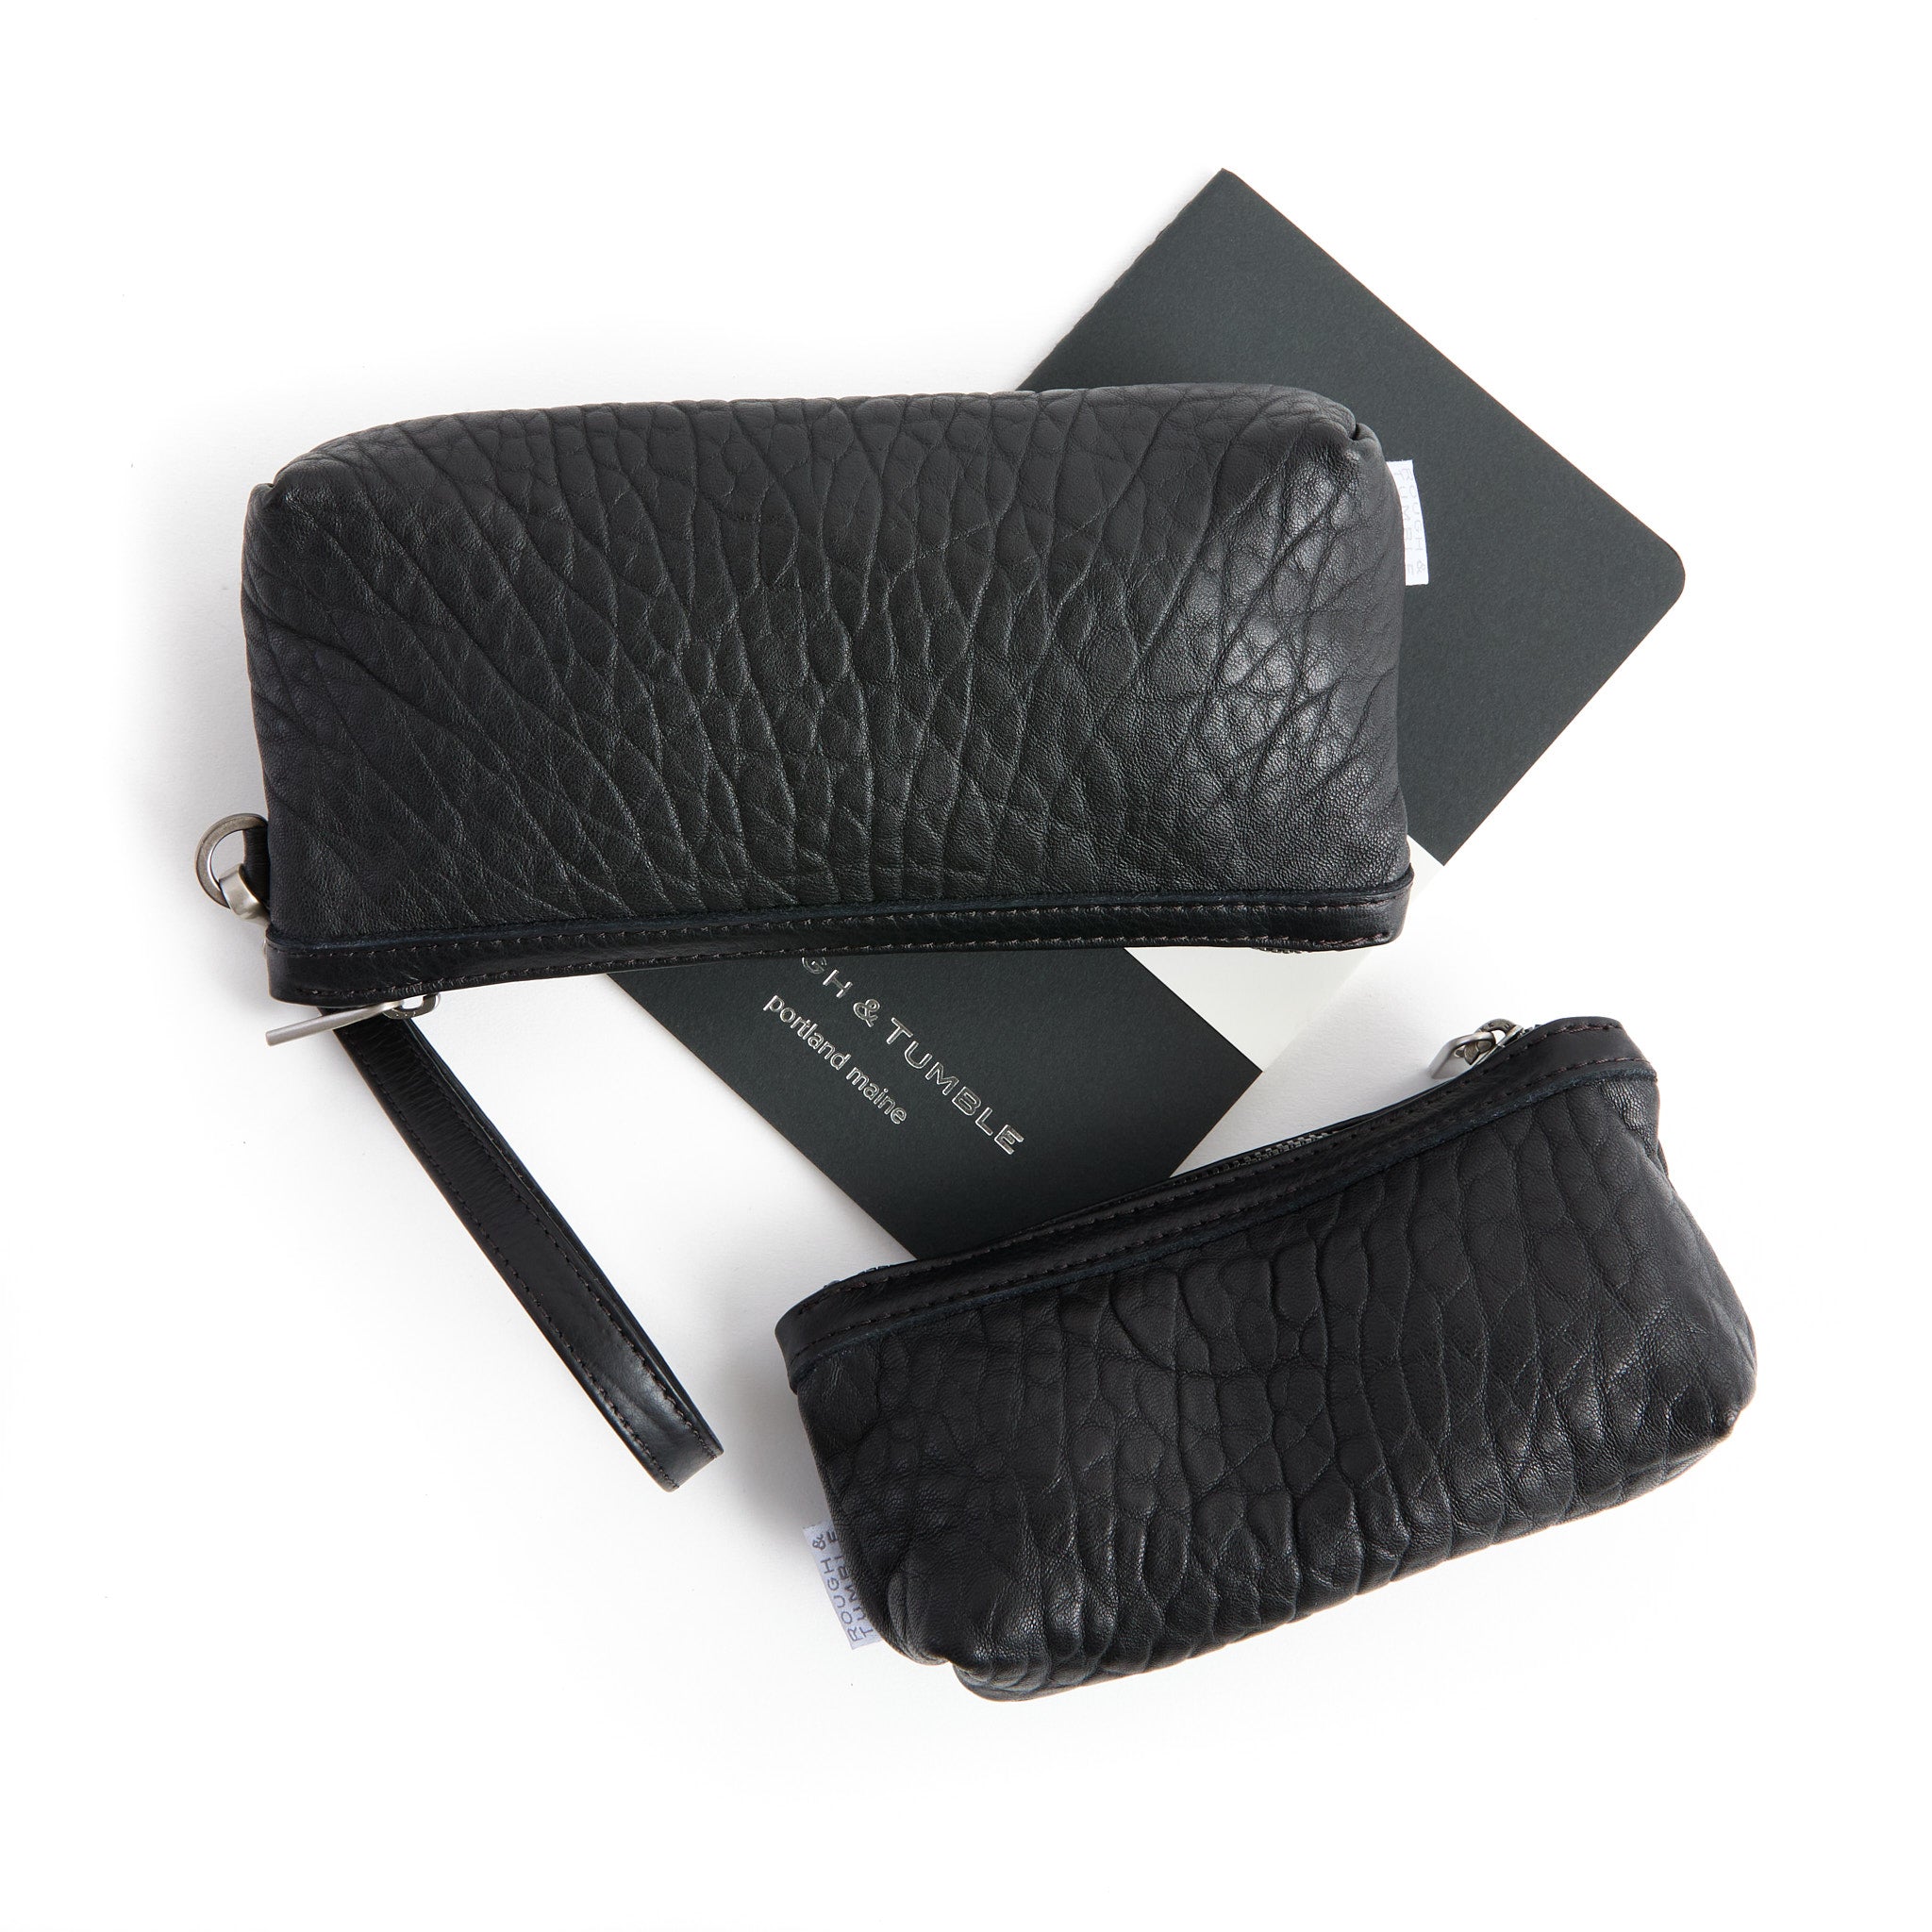 zip pouch small with medium in matte black pebble and black